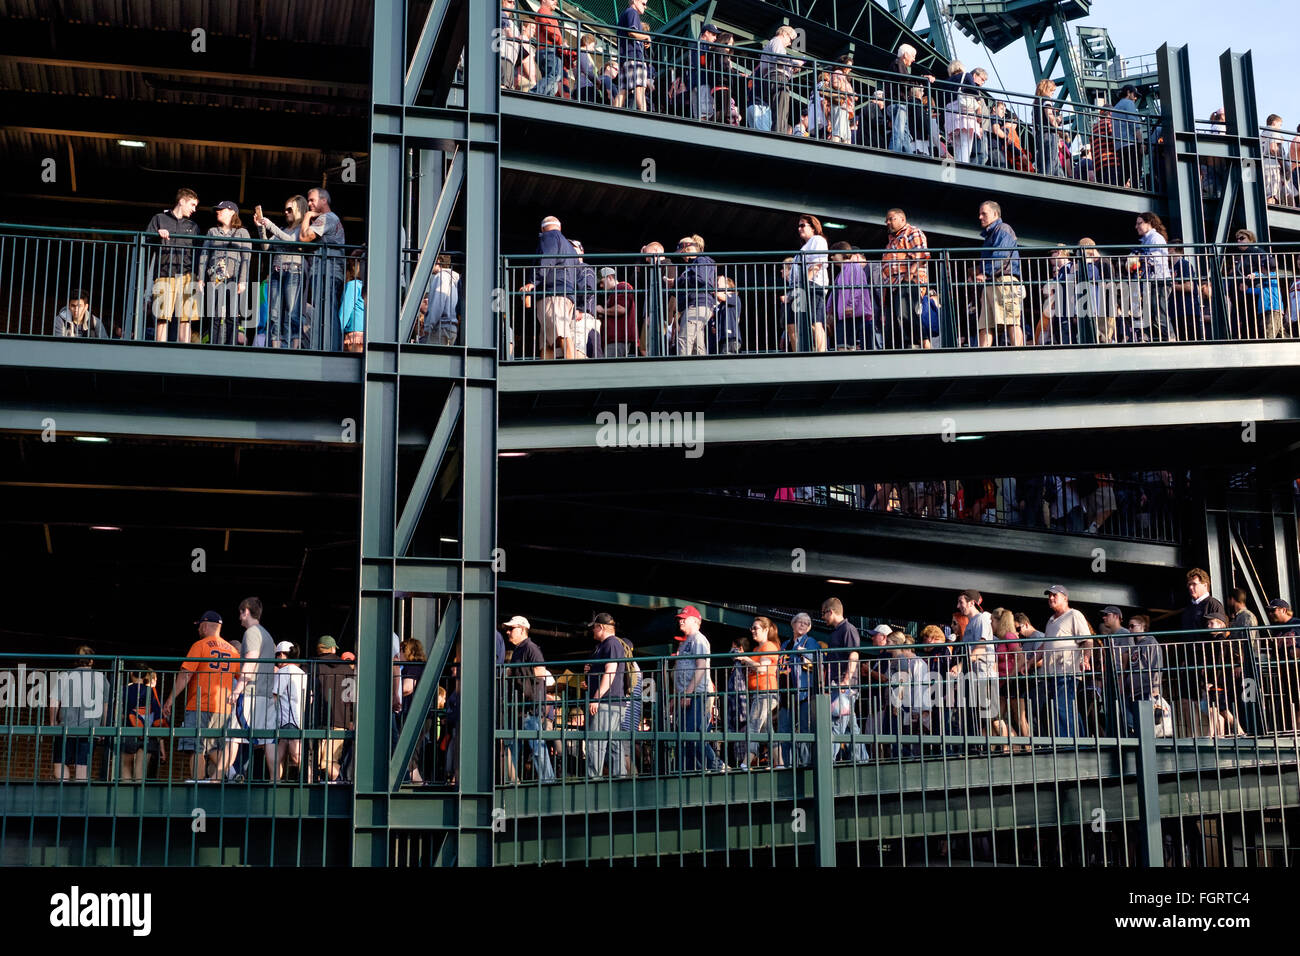 Crowds of fans leaving Comerica Park after a a baseball game Stock Photo